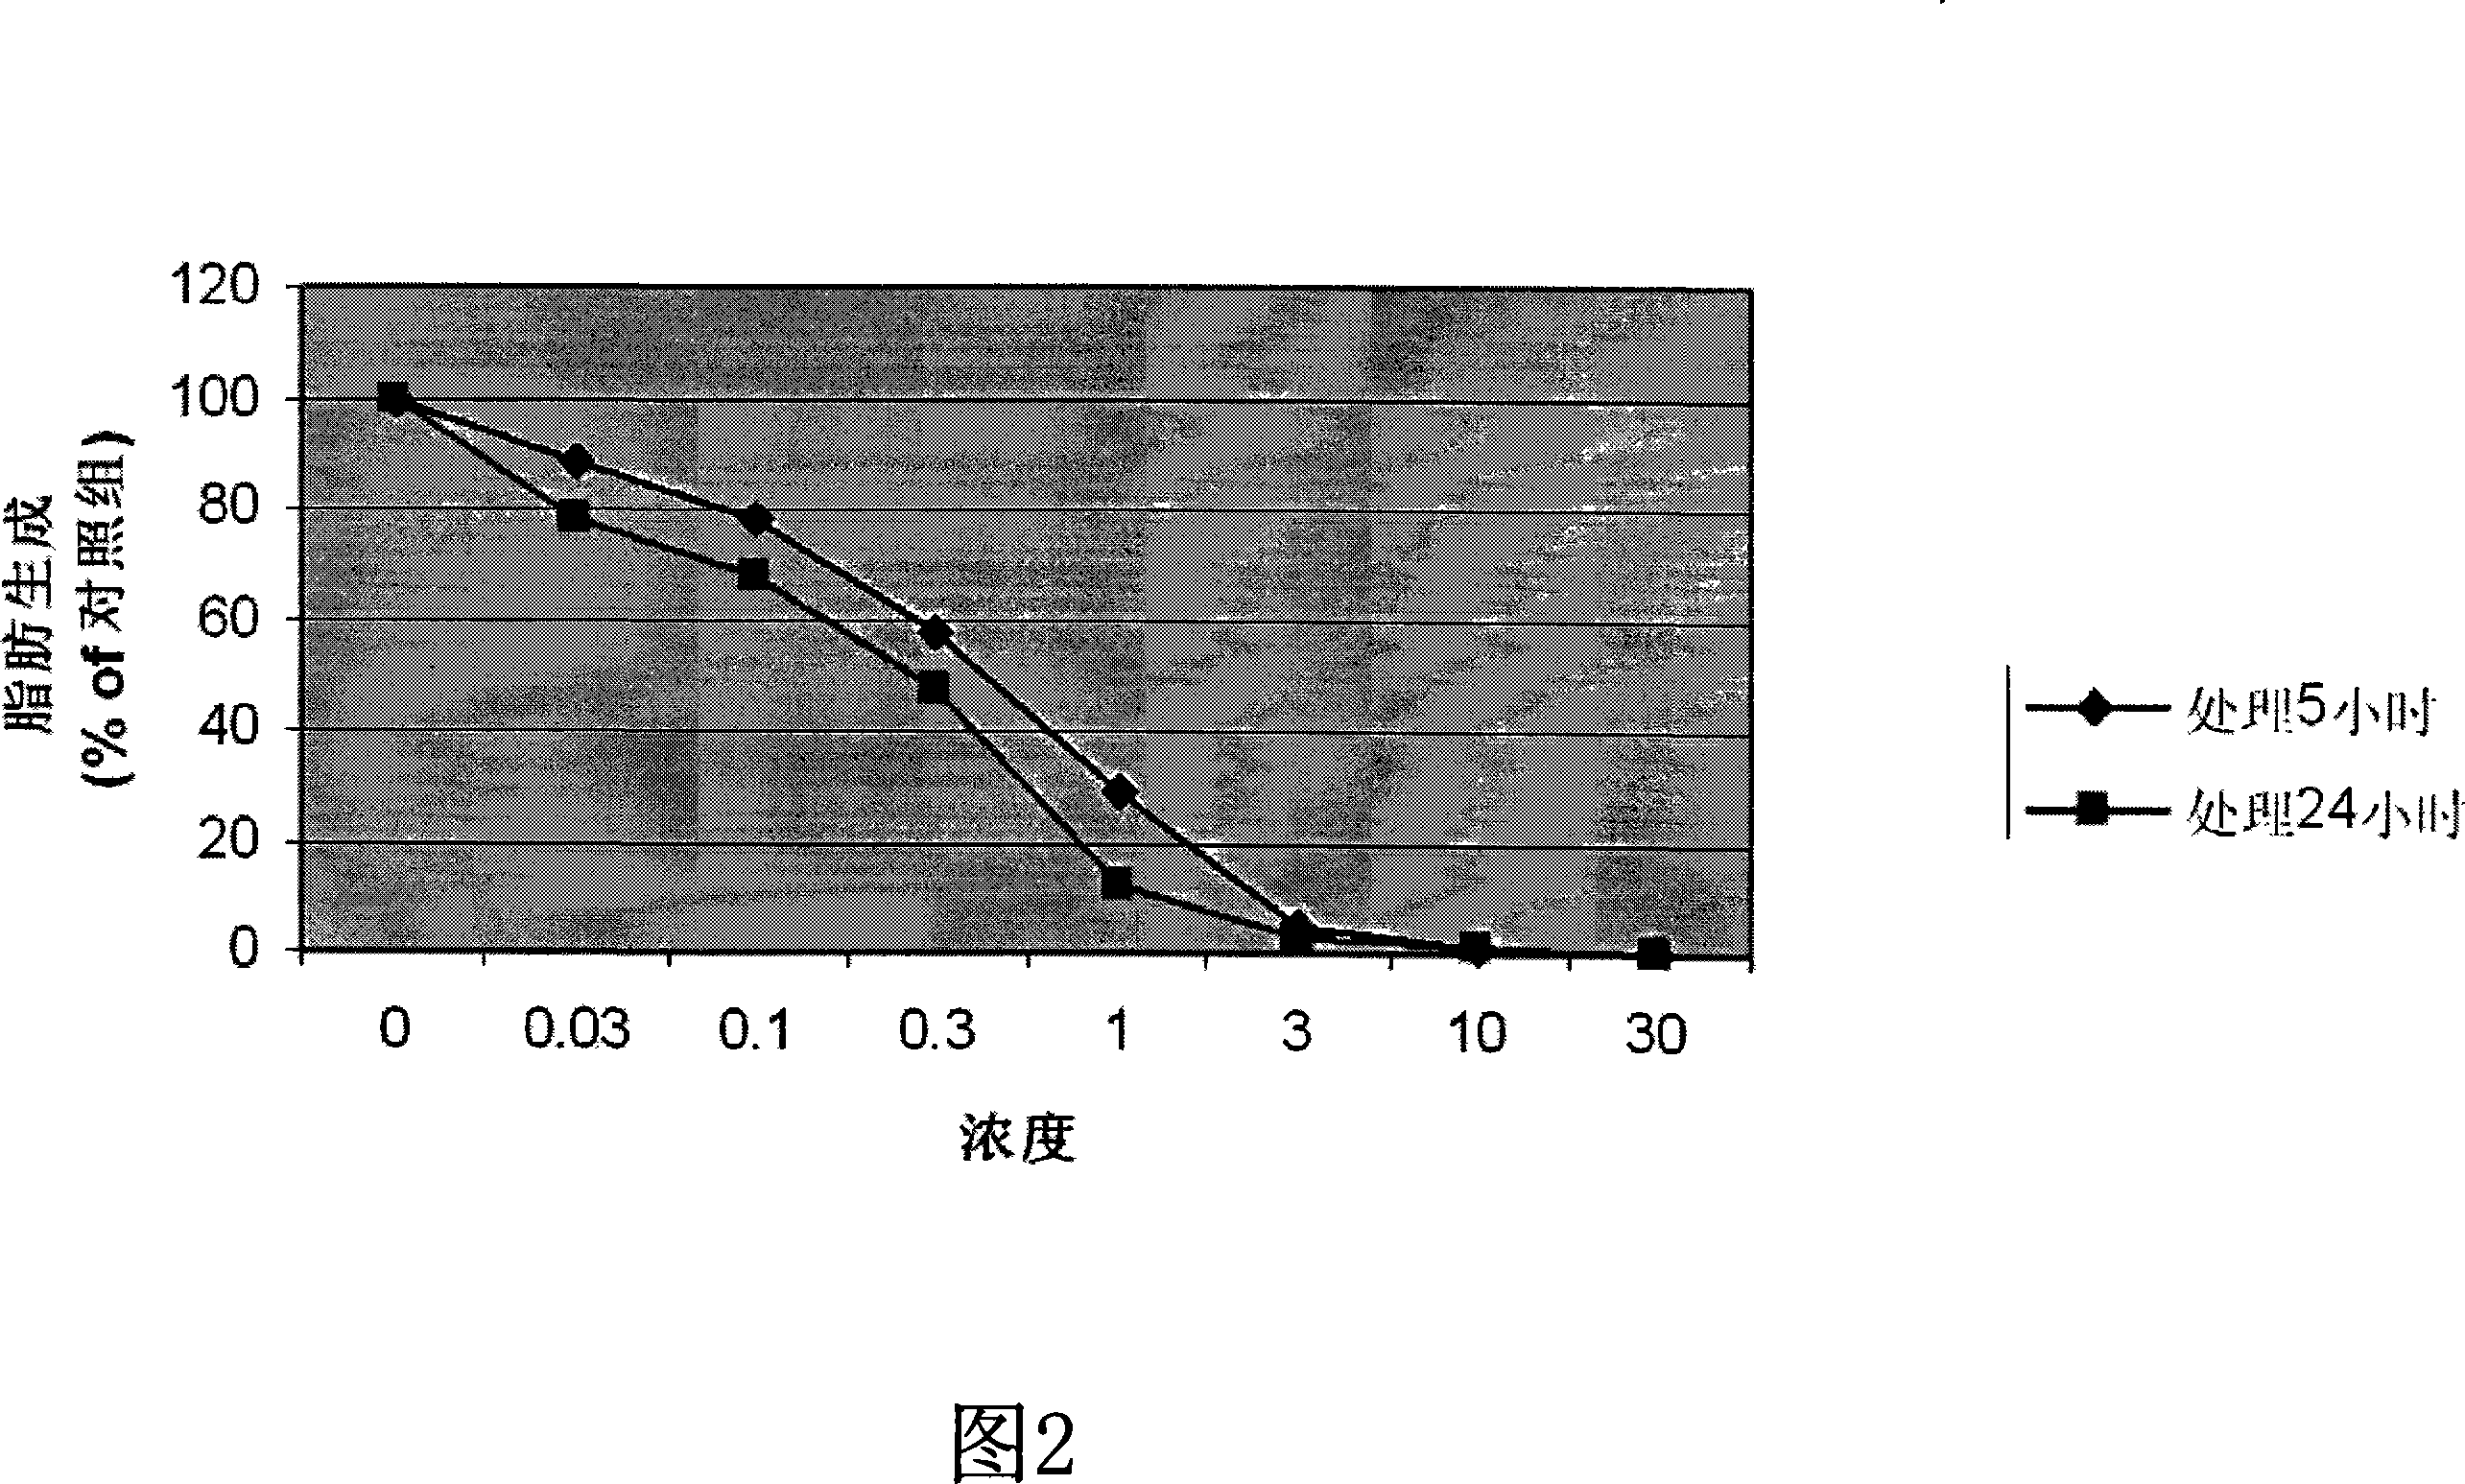 Two anti-cancer medicament raw material compounds